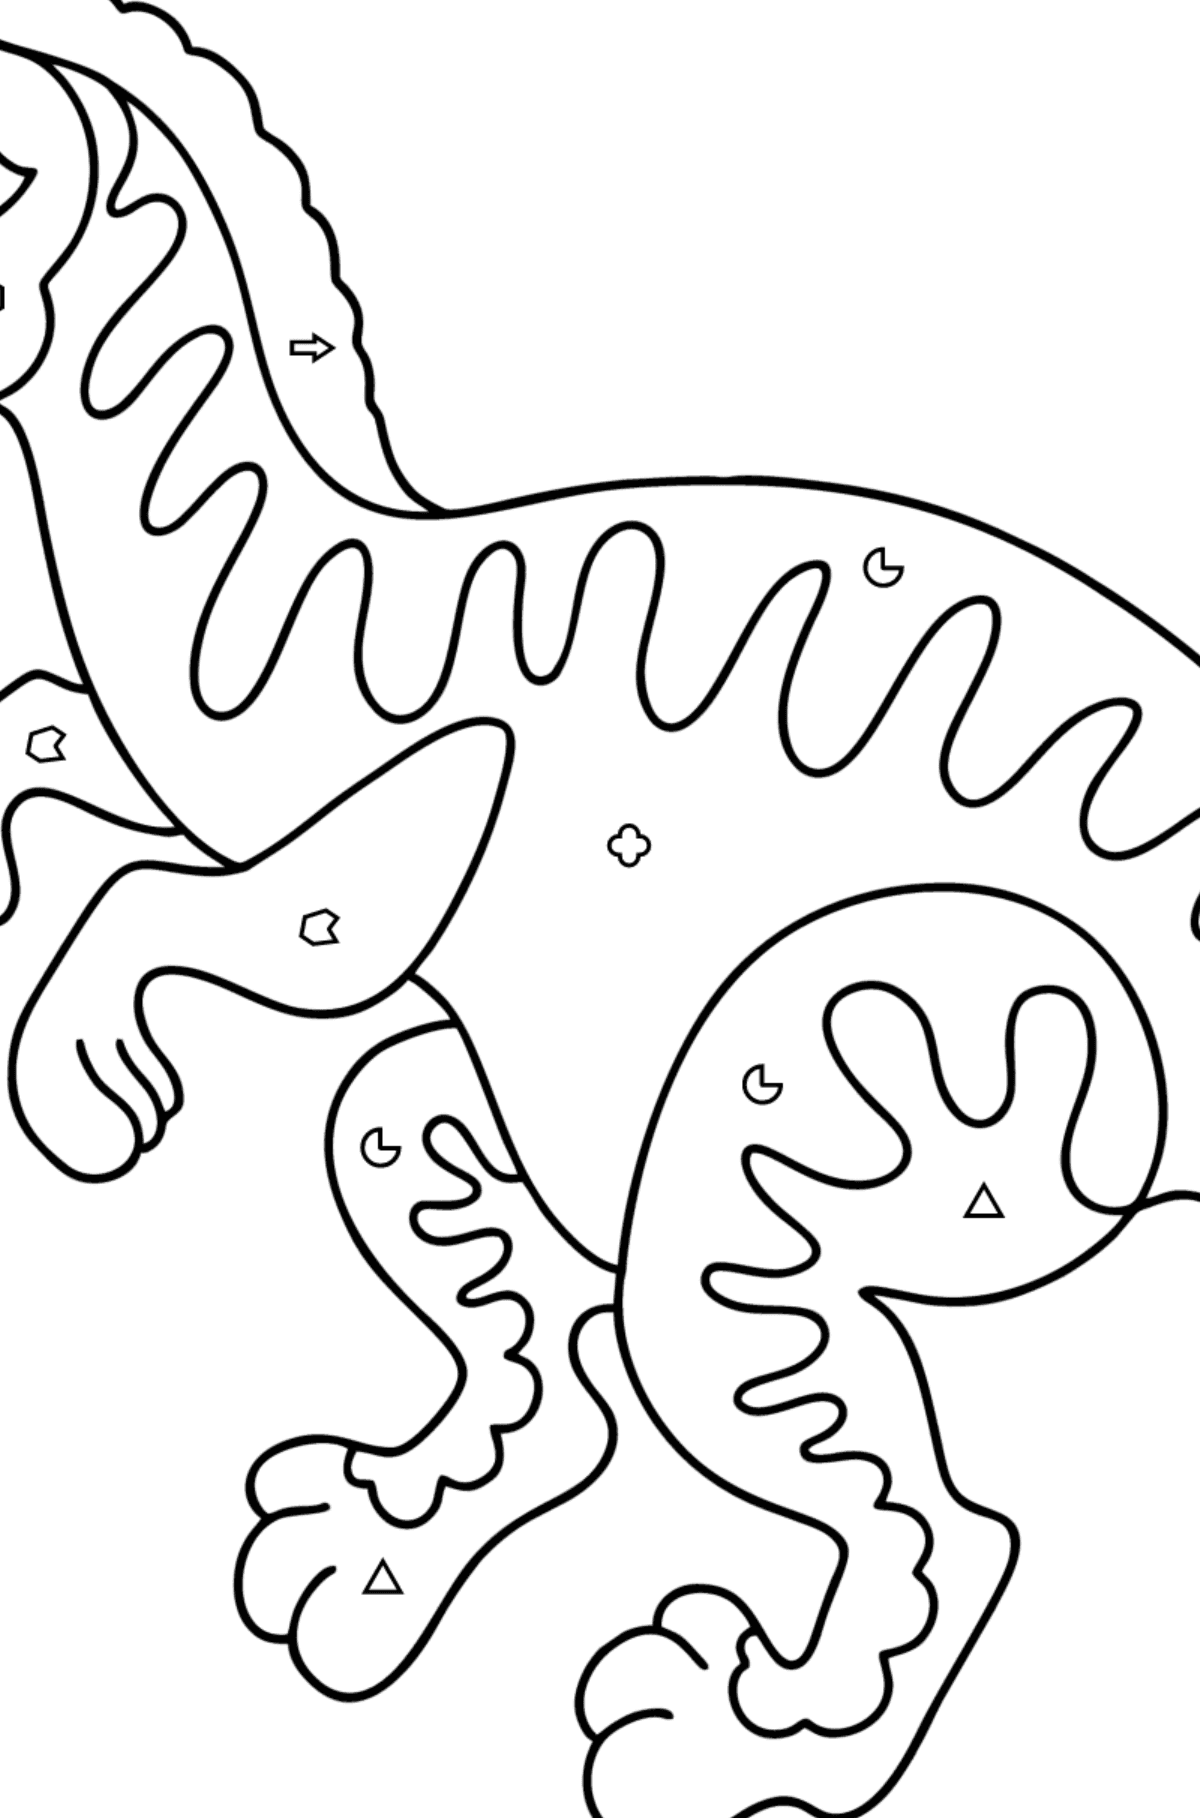 Velociraptor coloring page - Coloring by Geometric Shapes for Kids